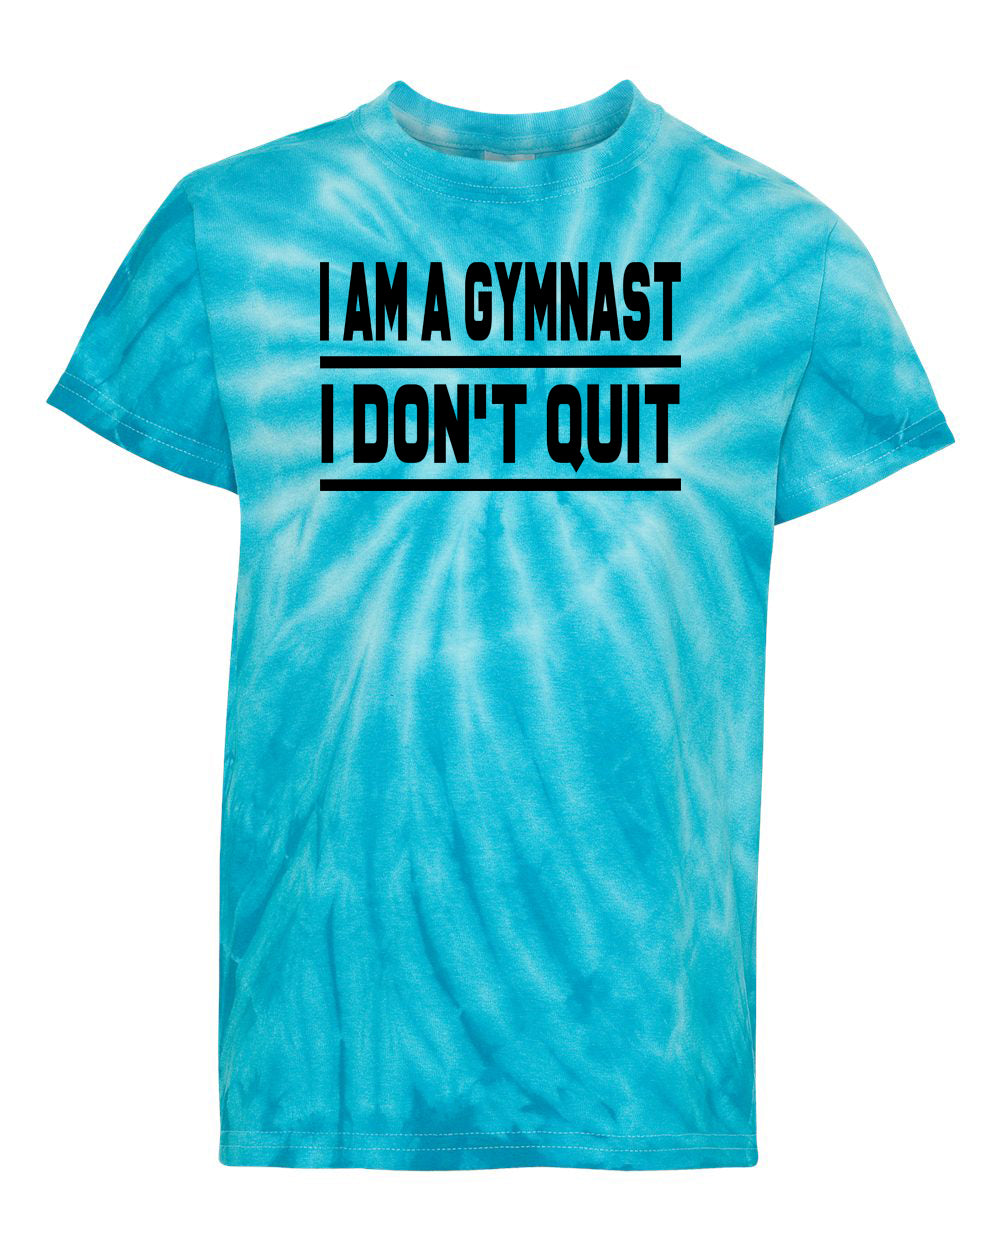 I Am A Gymnast I Don't Quit Adult Tie Dye T-Shirt Turquoise